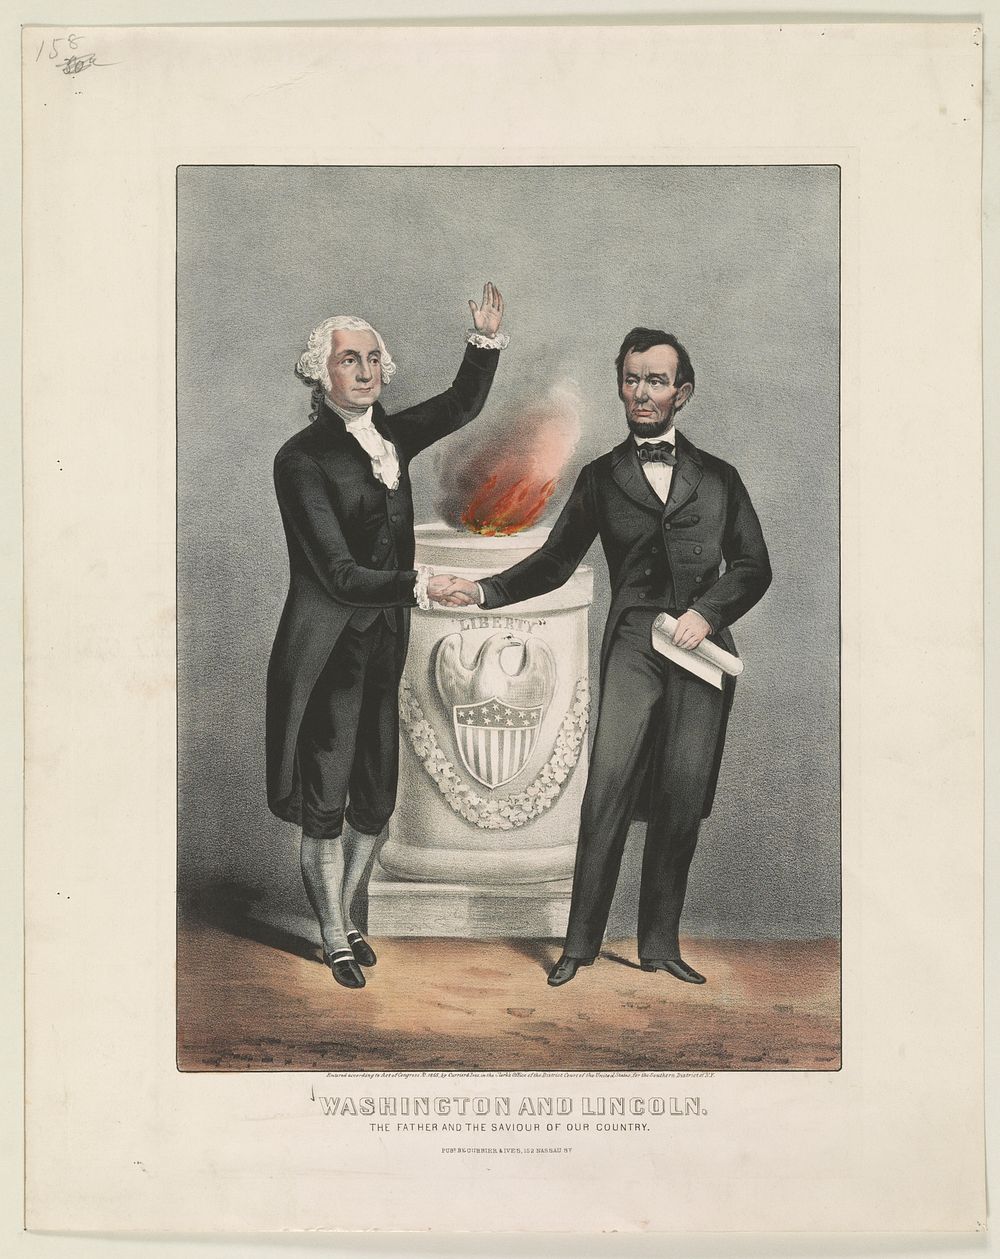 Washington and Lincoln. The father and the saviour of our country, Currier & Ives.